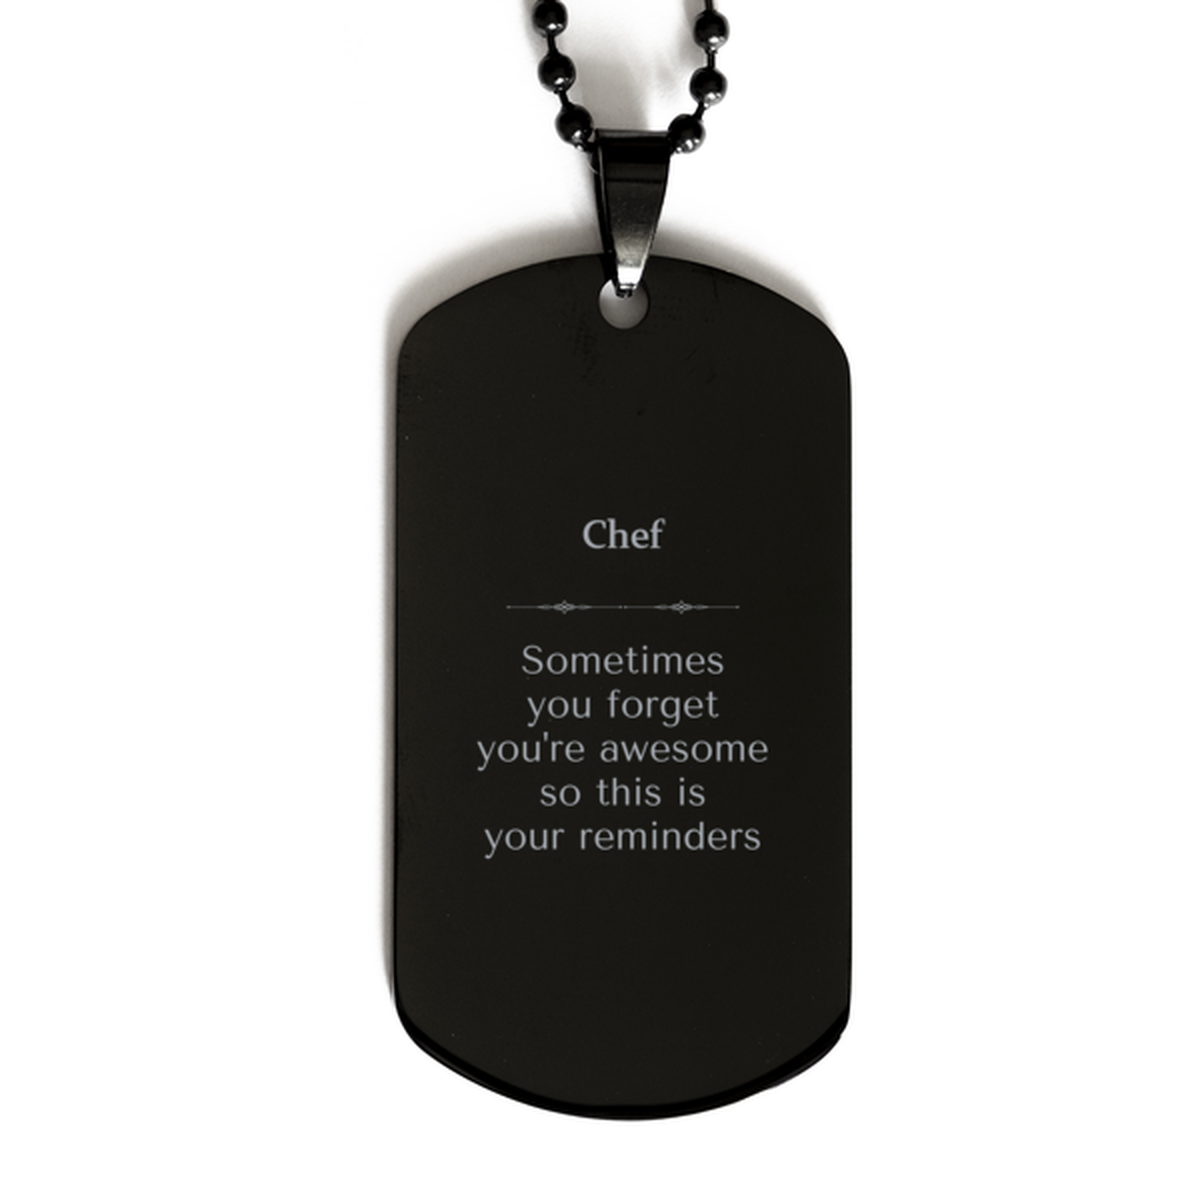 Sentimental Chef Black Dog Tag, Chef Sometimes you forget you're awesome so this is your reminders, Graduation Christmas Birthday Gifts for Chef, Men, Women, Coworkers